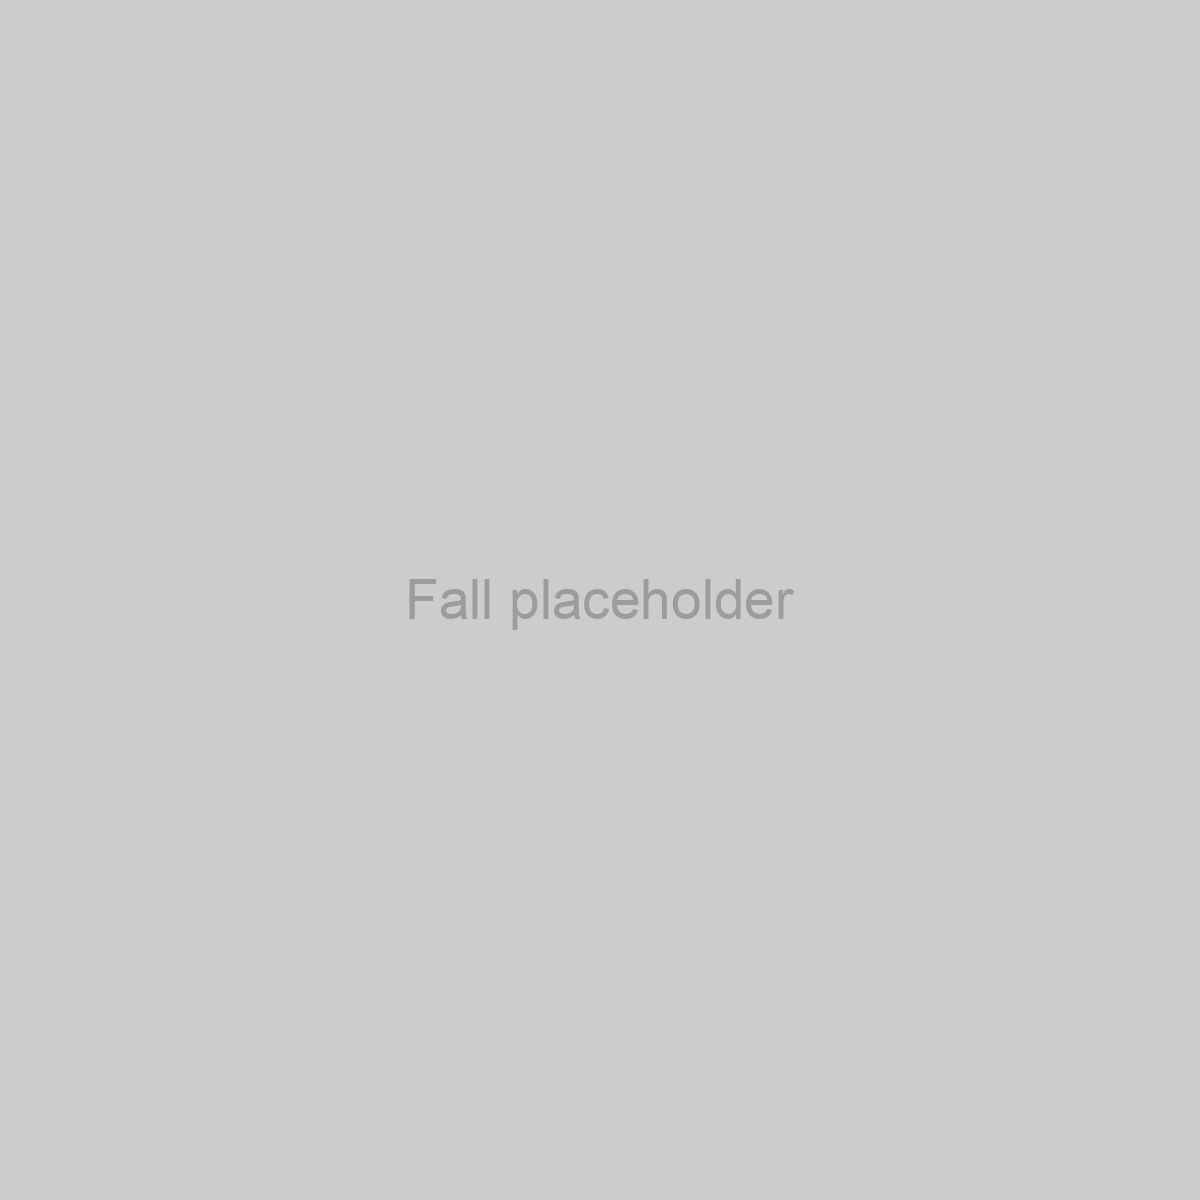 Fall Placeholder Image